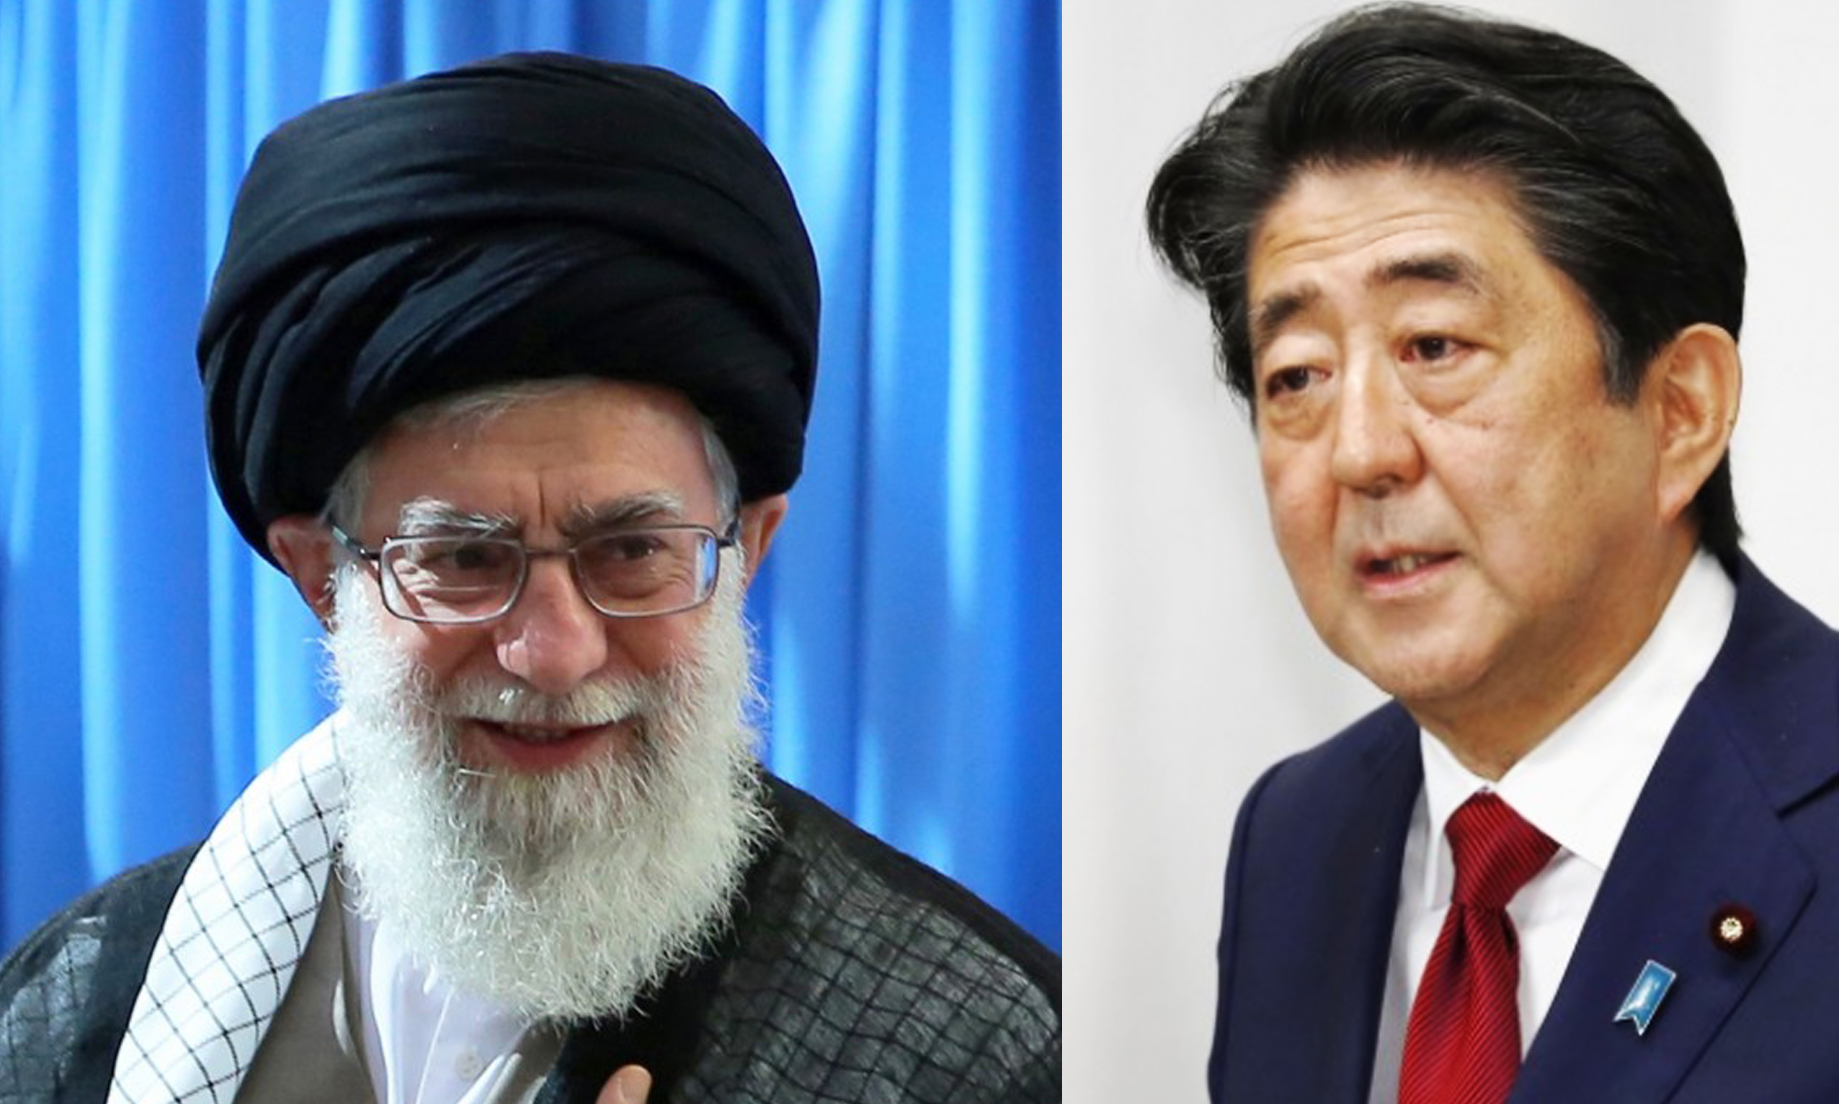 Japan’s Abe to meet Iran’s supreme leader amid tensions with U.S.